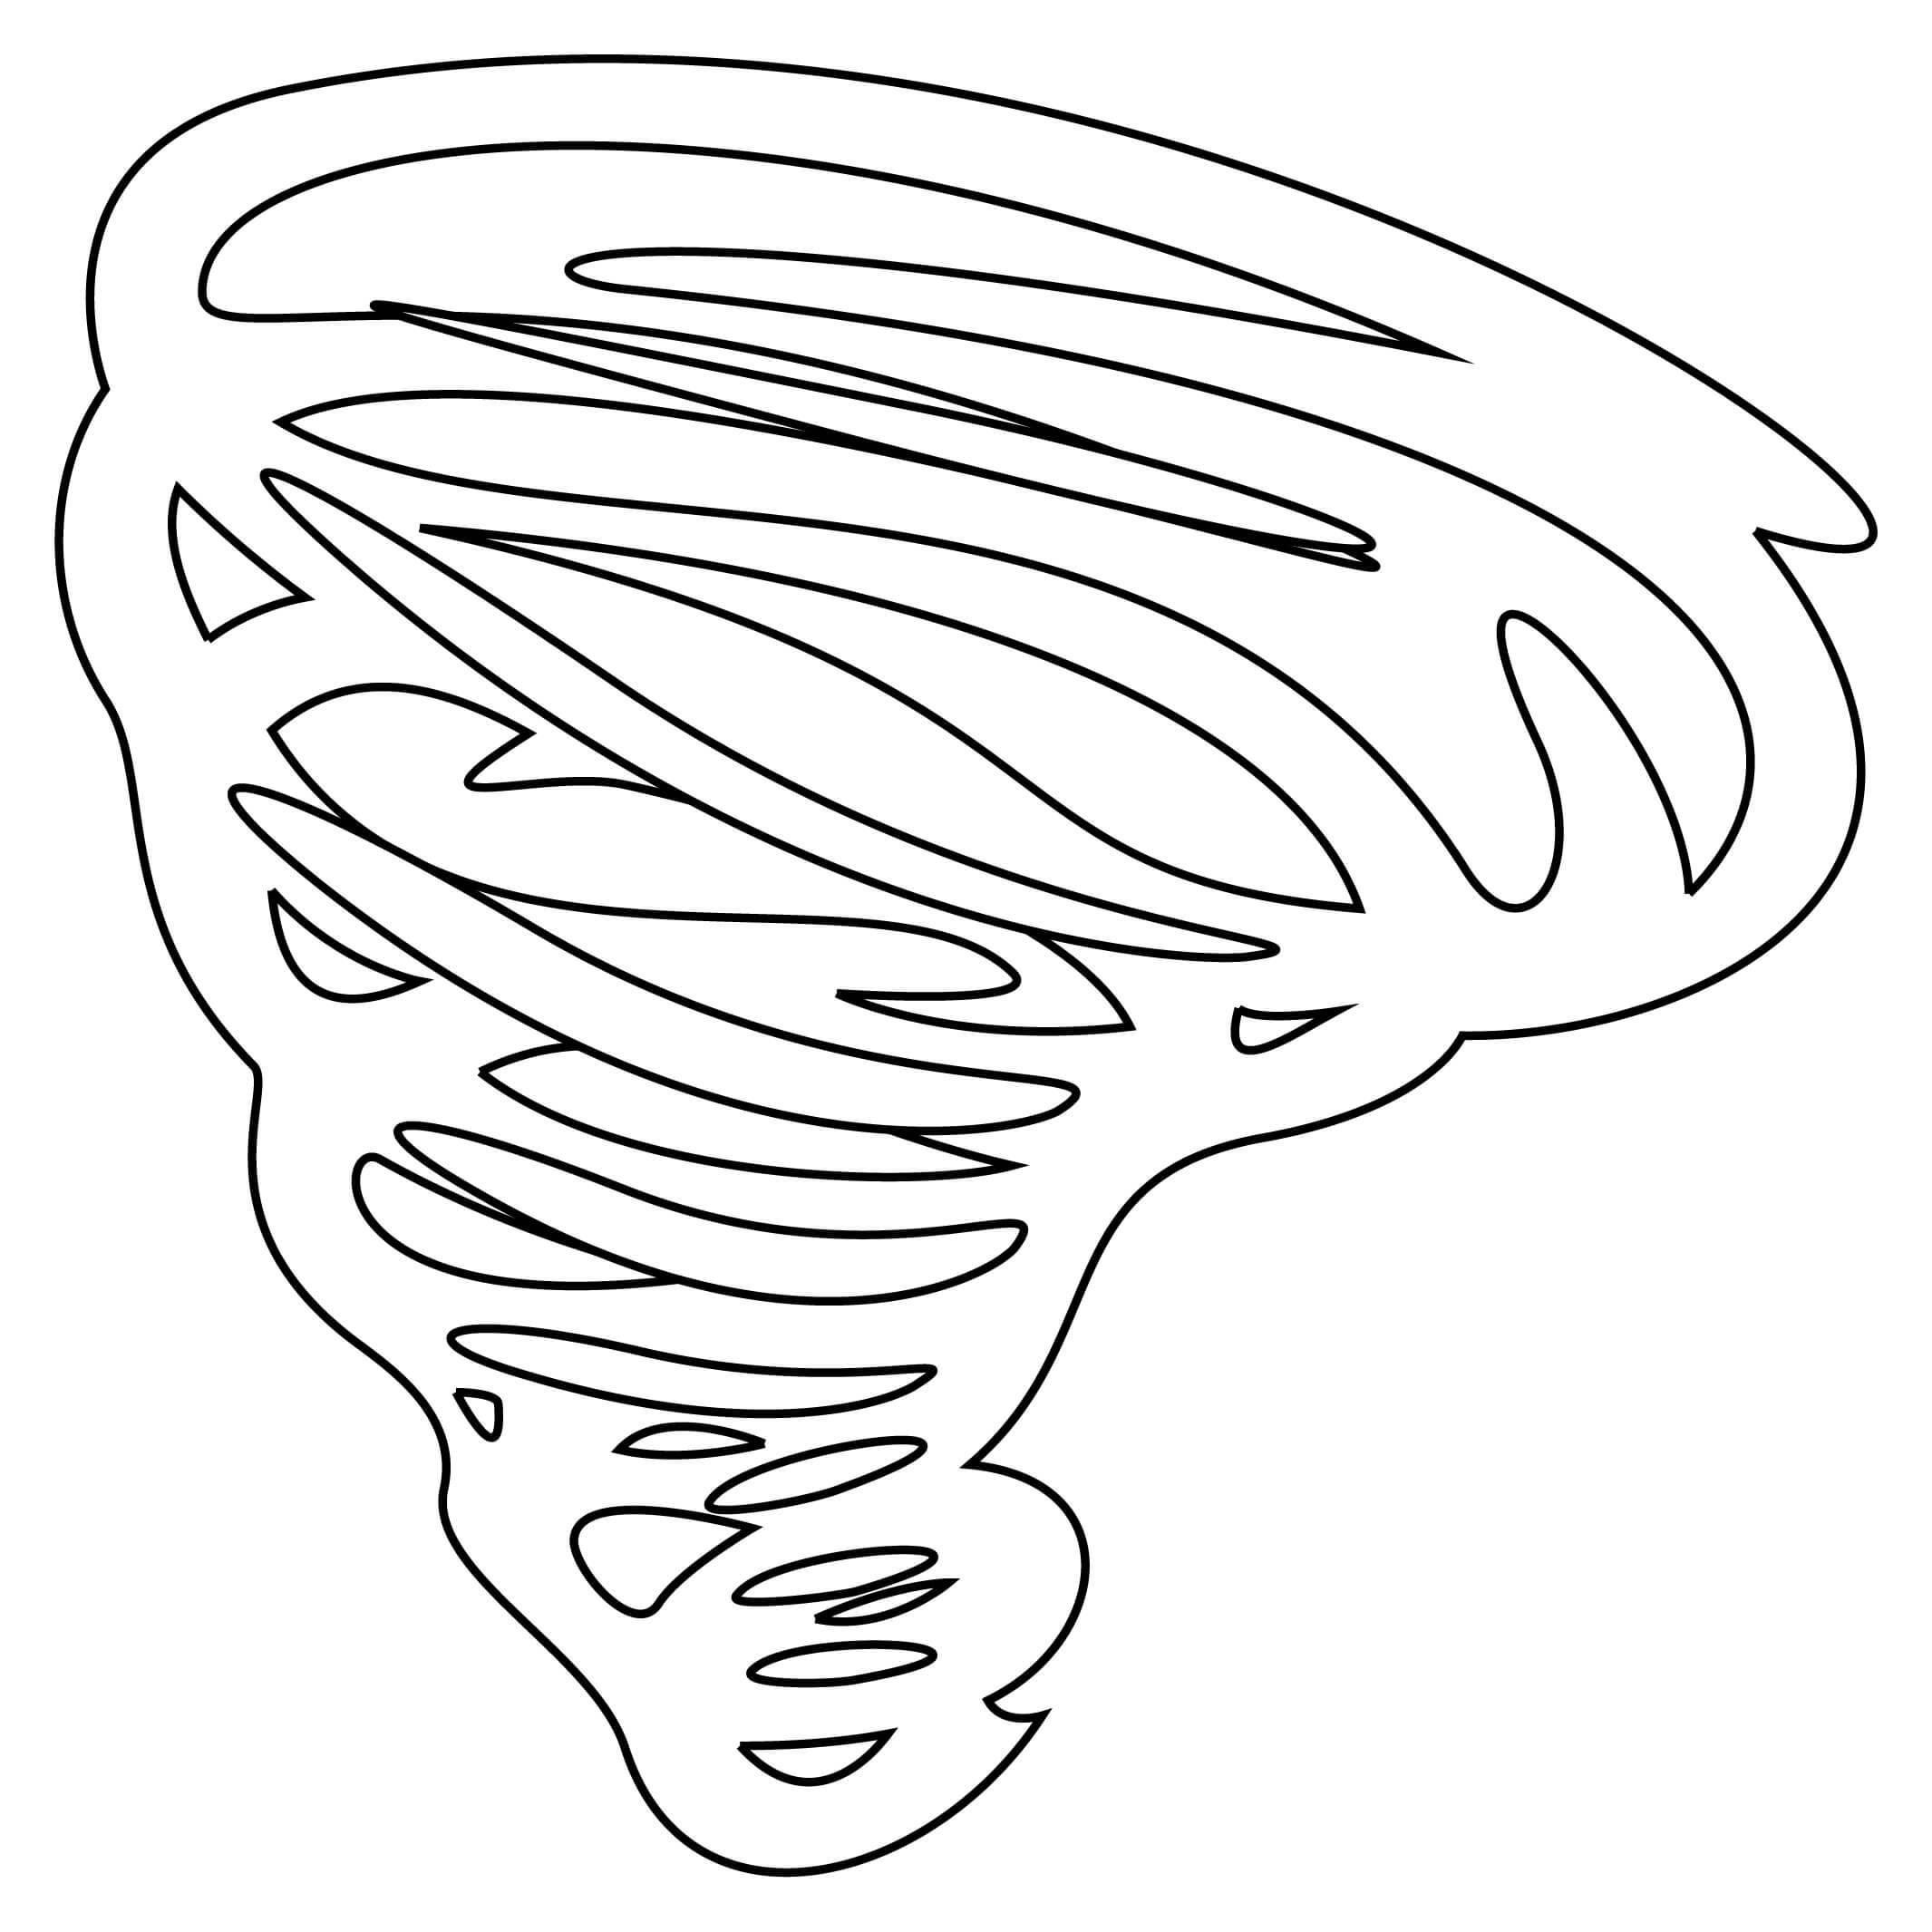 Tornade 4 coloring page